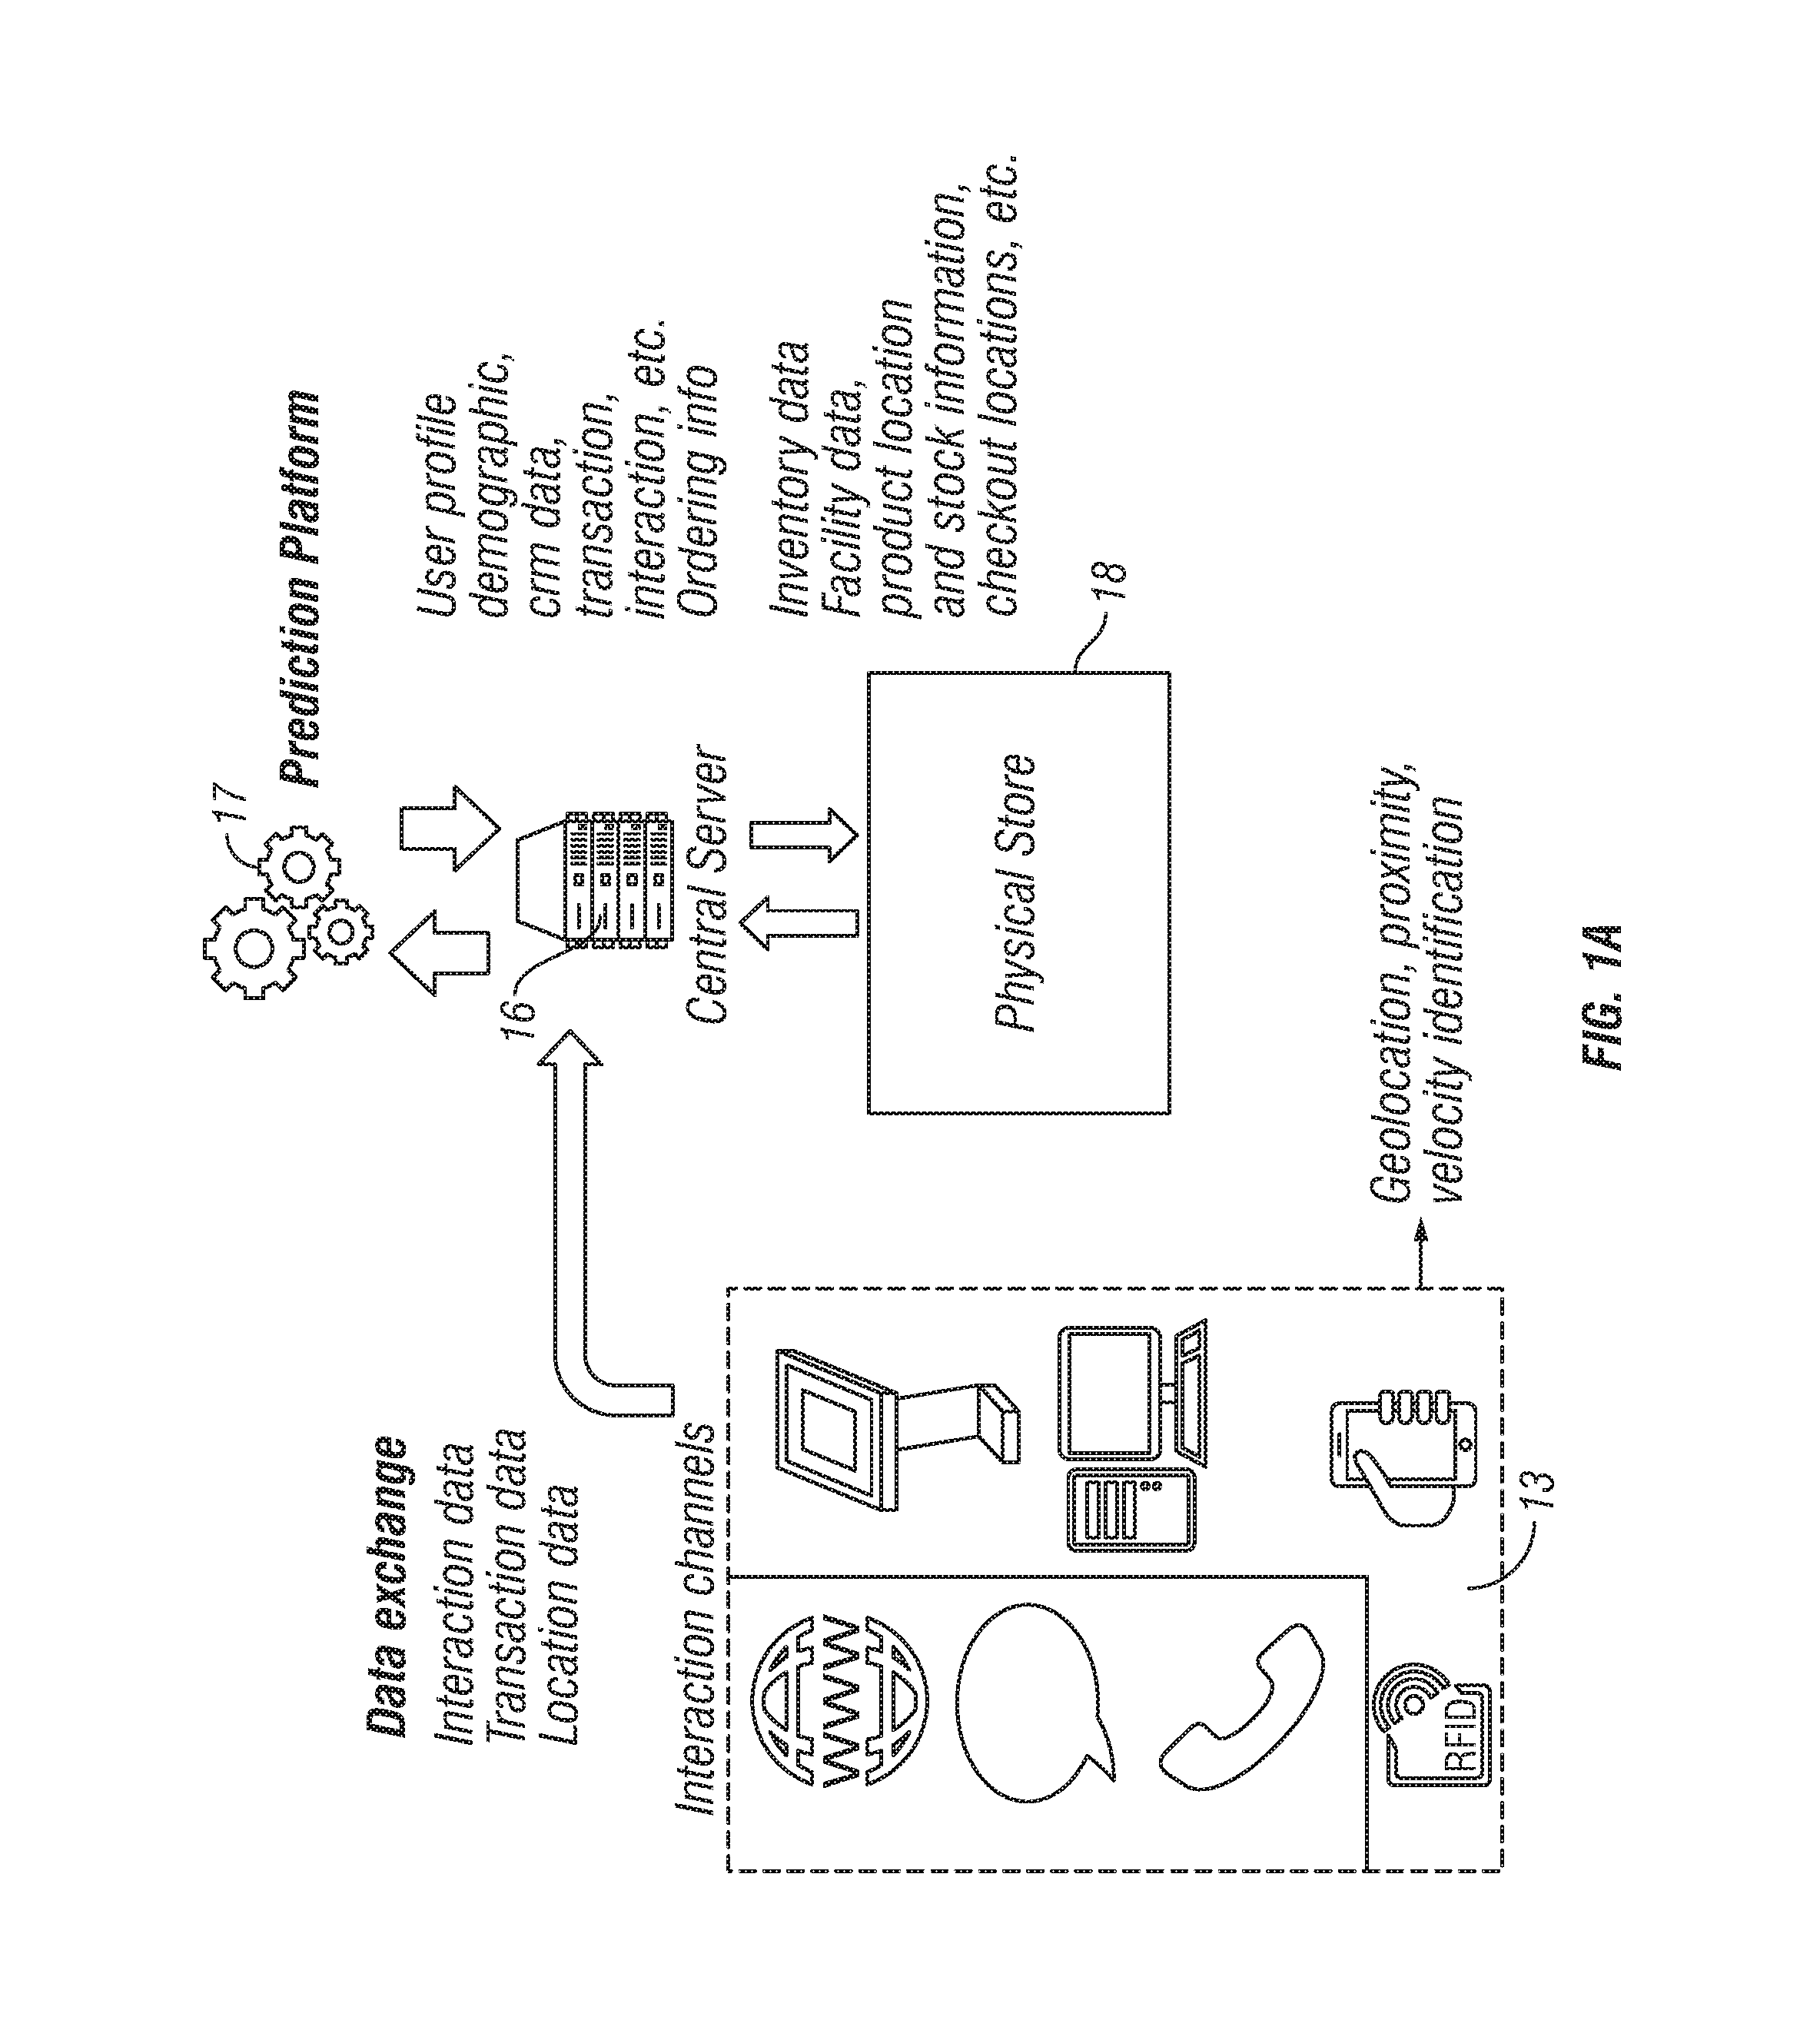 Method And Apparatus For Enhanced In-Store Retail Experience Using Location Awareness